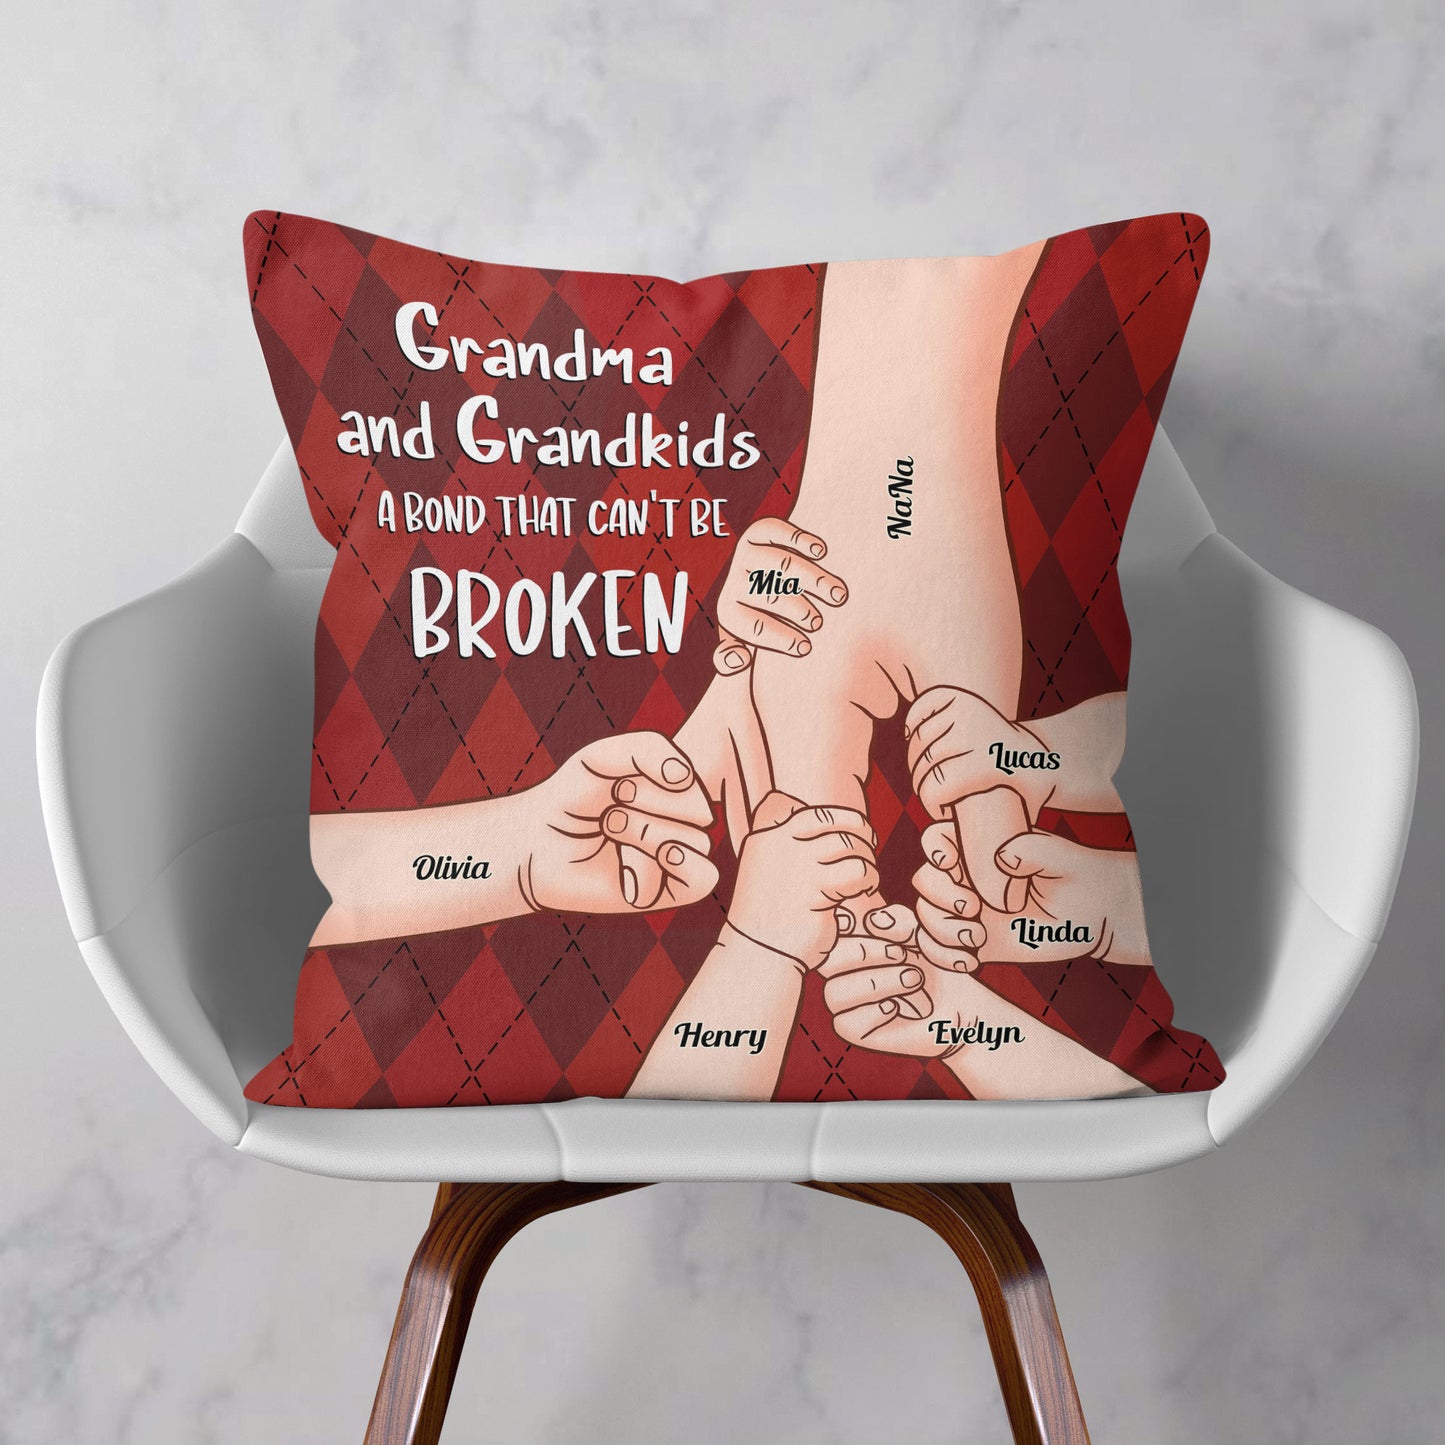 Grandparent And Grandkid A Bond That Can't Be Broken - Personalized Pillow (Insert Included)